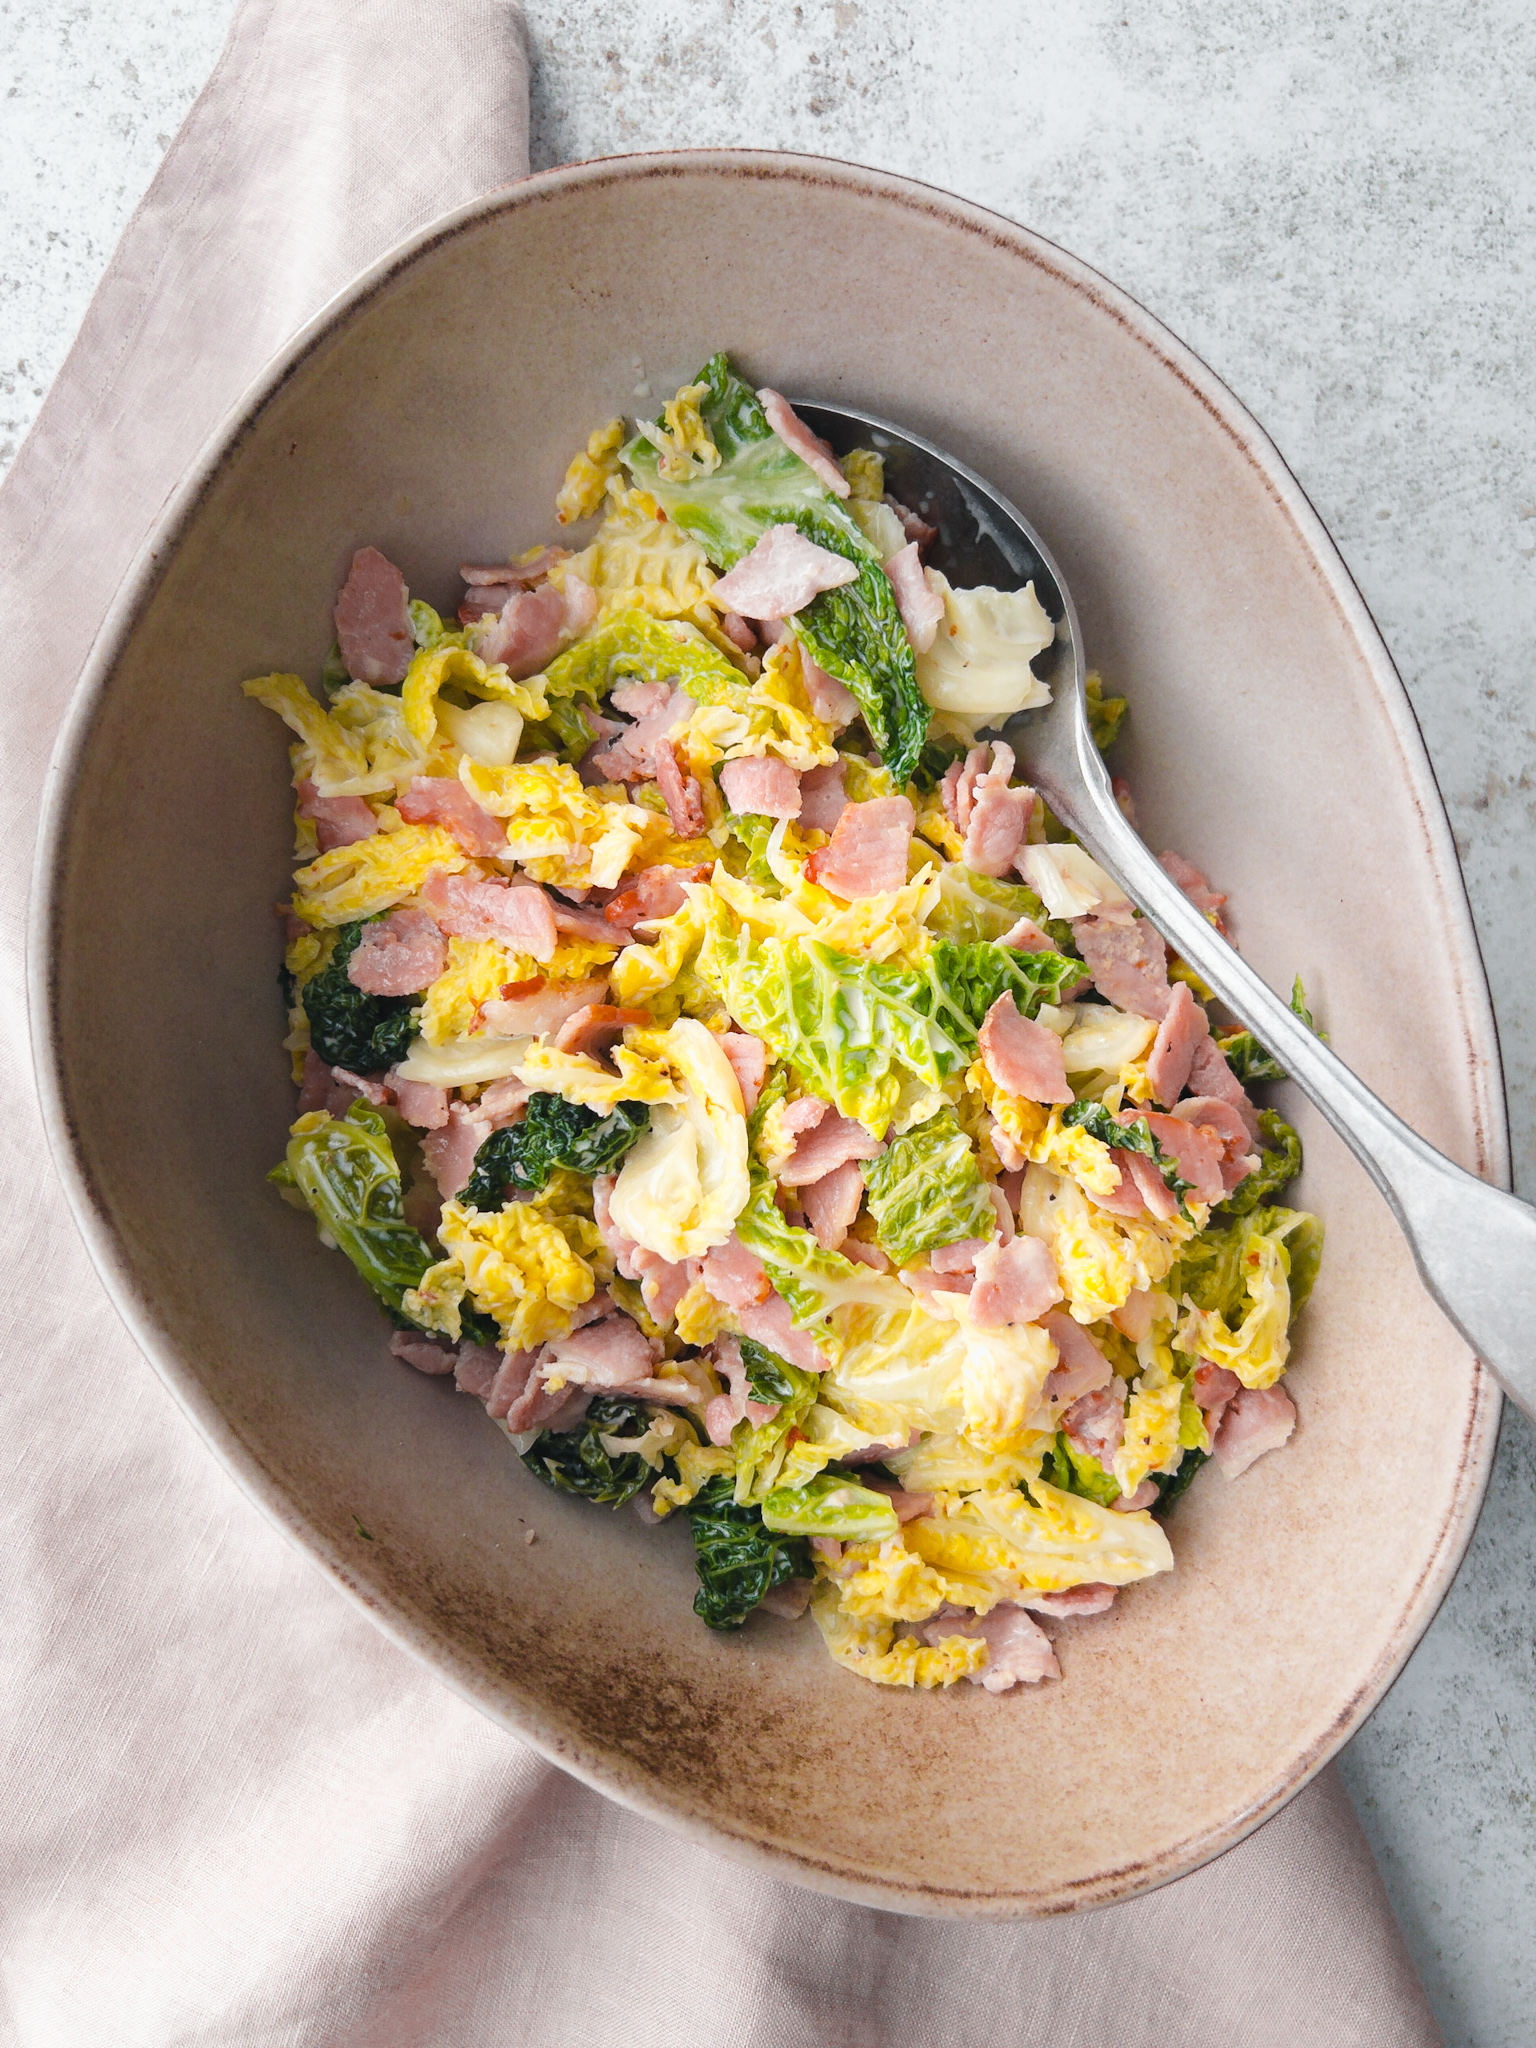 cabbage with bacon and cream - roast chicken side dish - family recipes